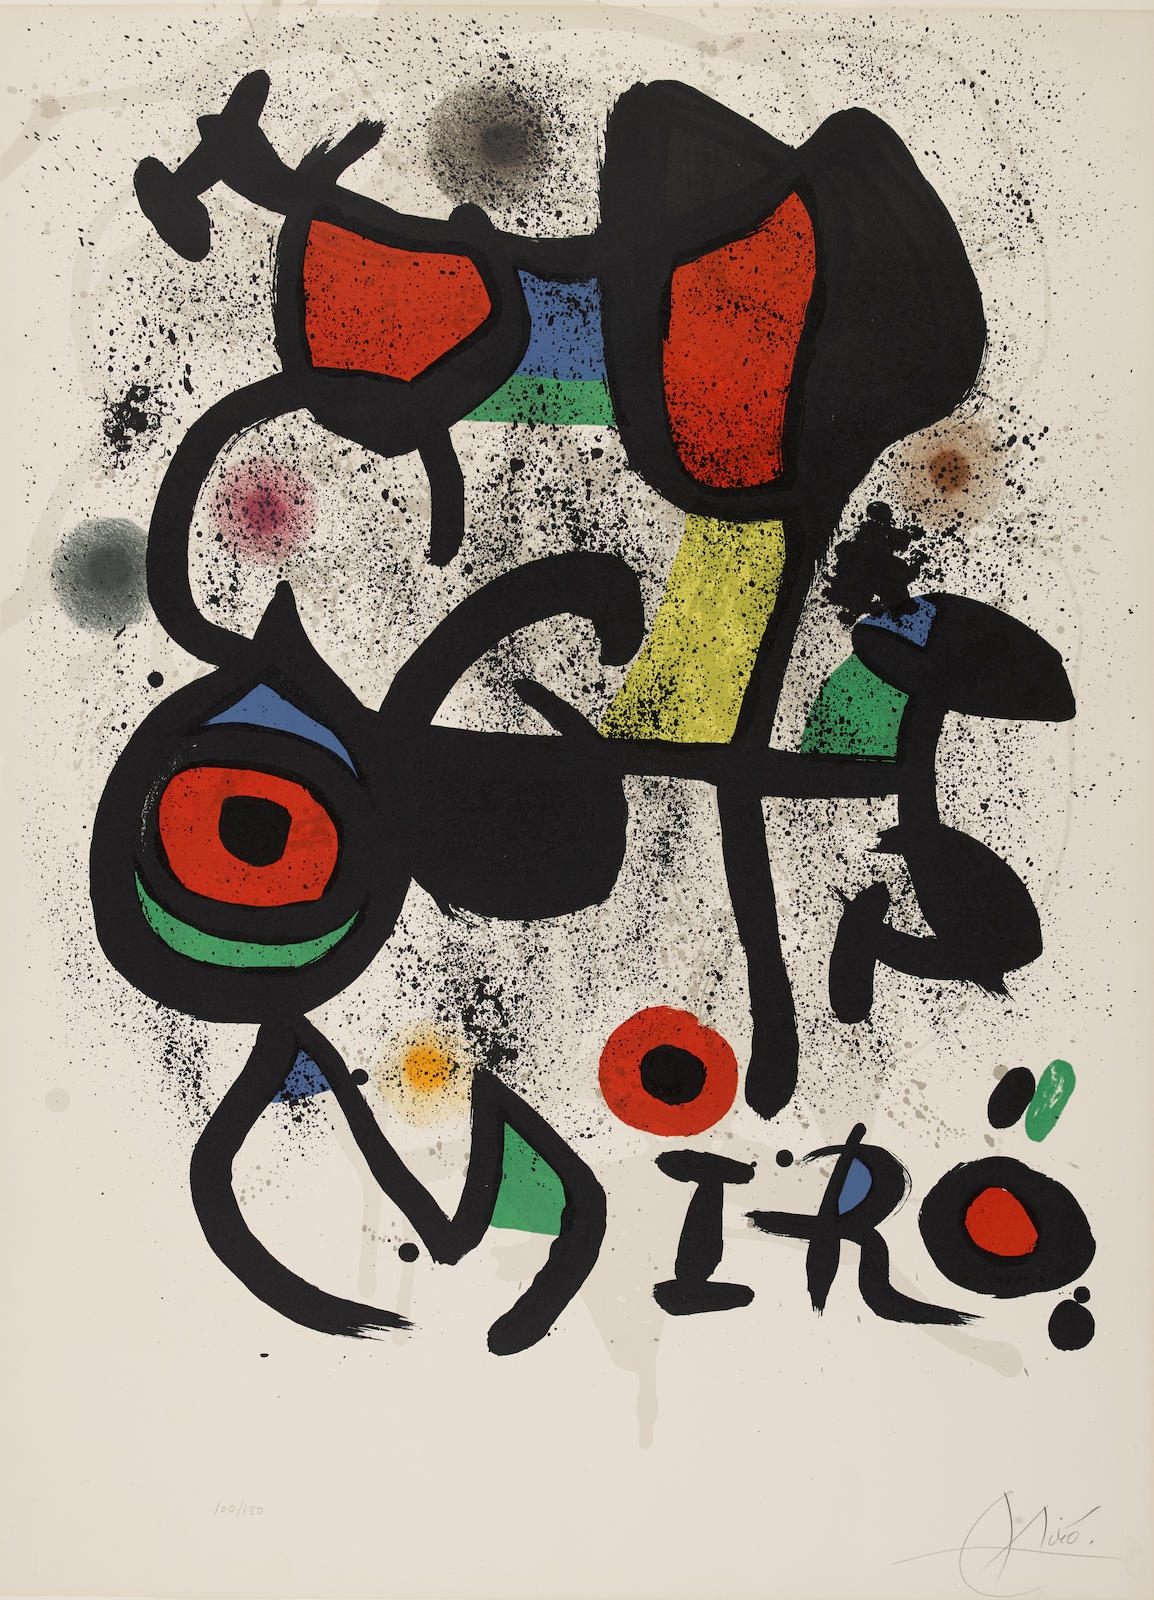 Poster for the Exhibition Bronzes, Hayward Gallery by Joan Miró, 1972